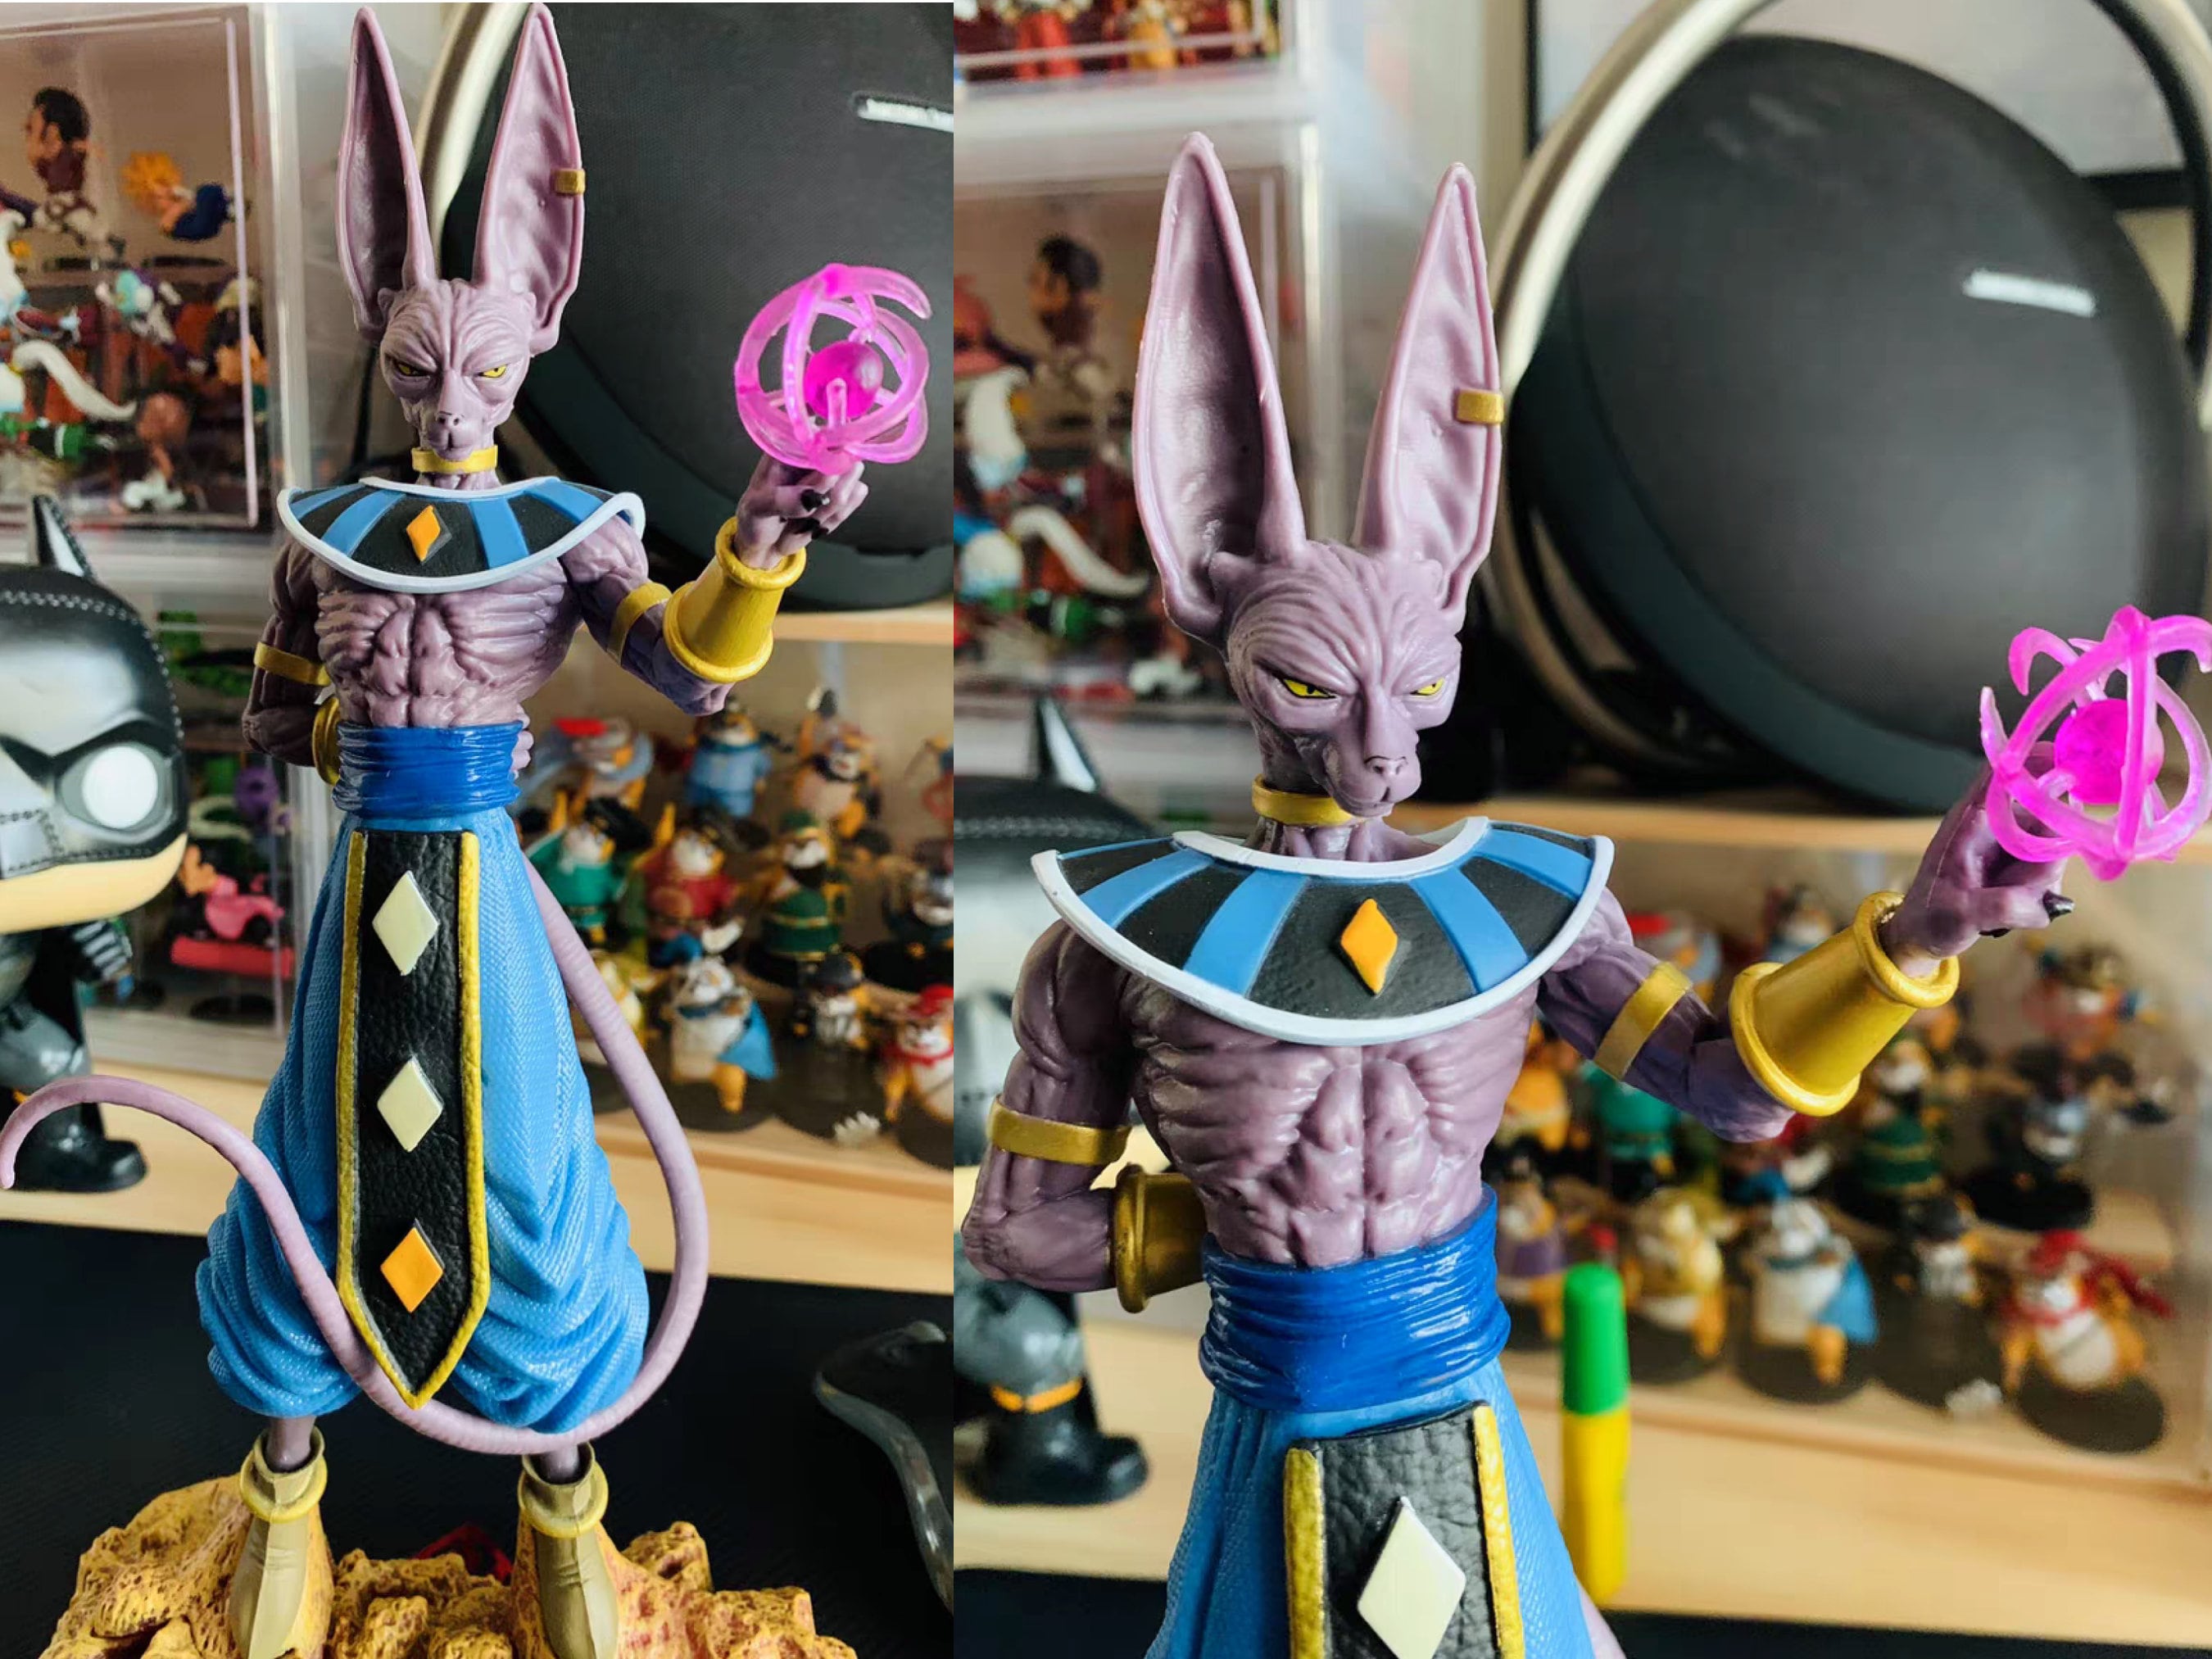 LESESOBE Beerus Figure Statues Figurine Lord Beerus Figure DBZ Collection  Birthday Gifts PVC 10.5 Inch